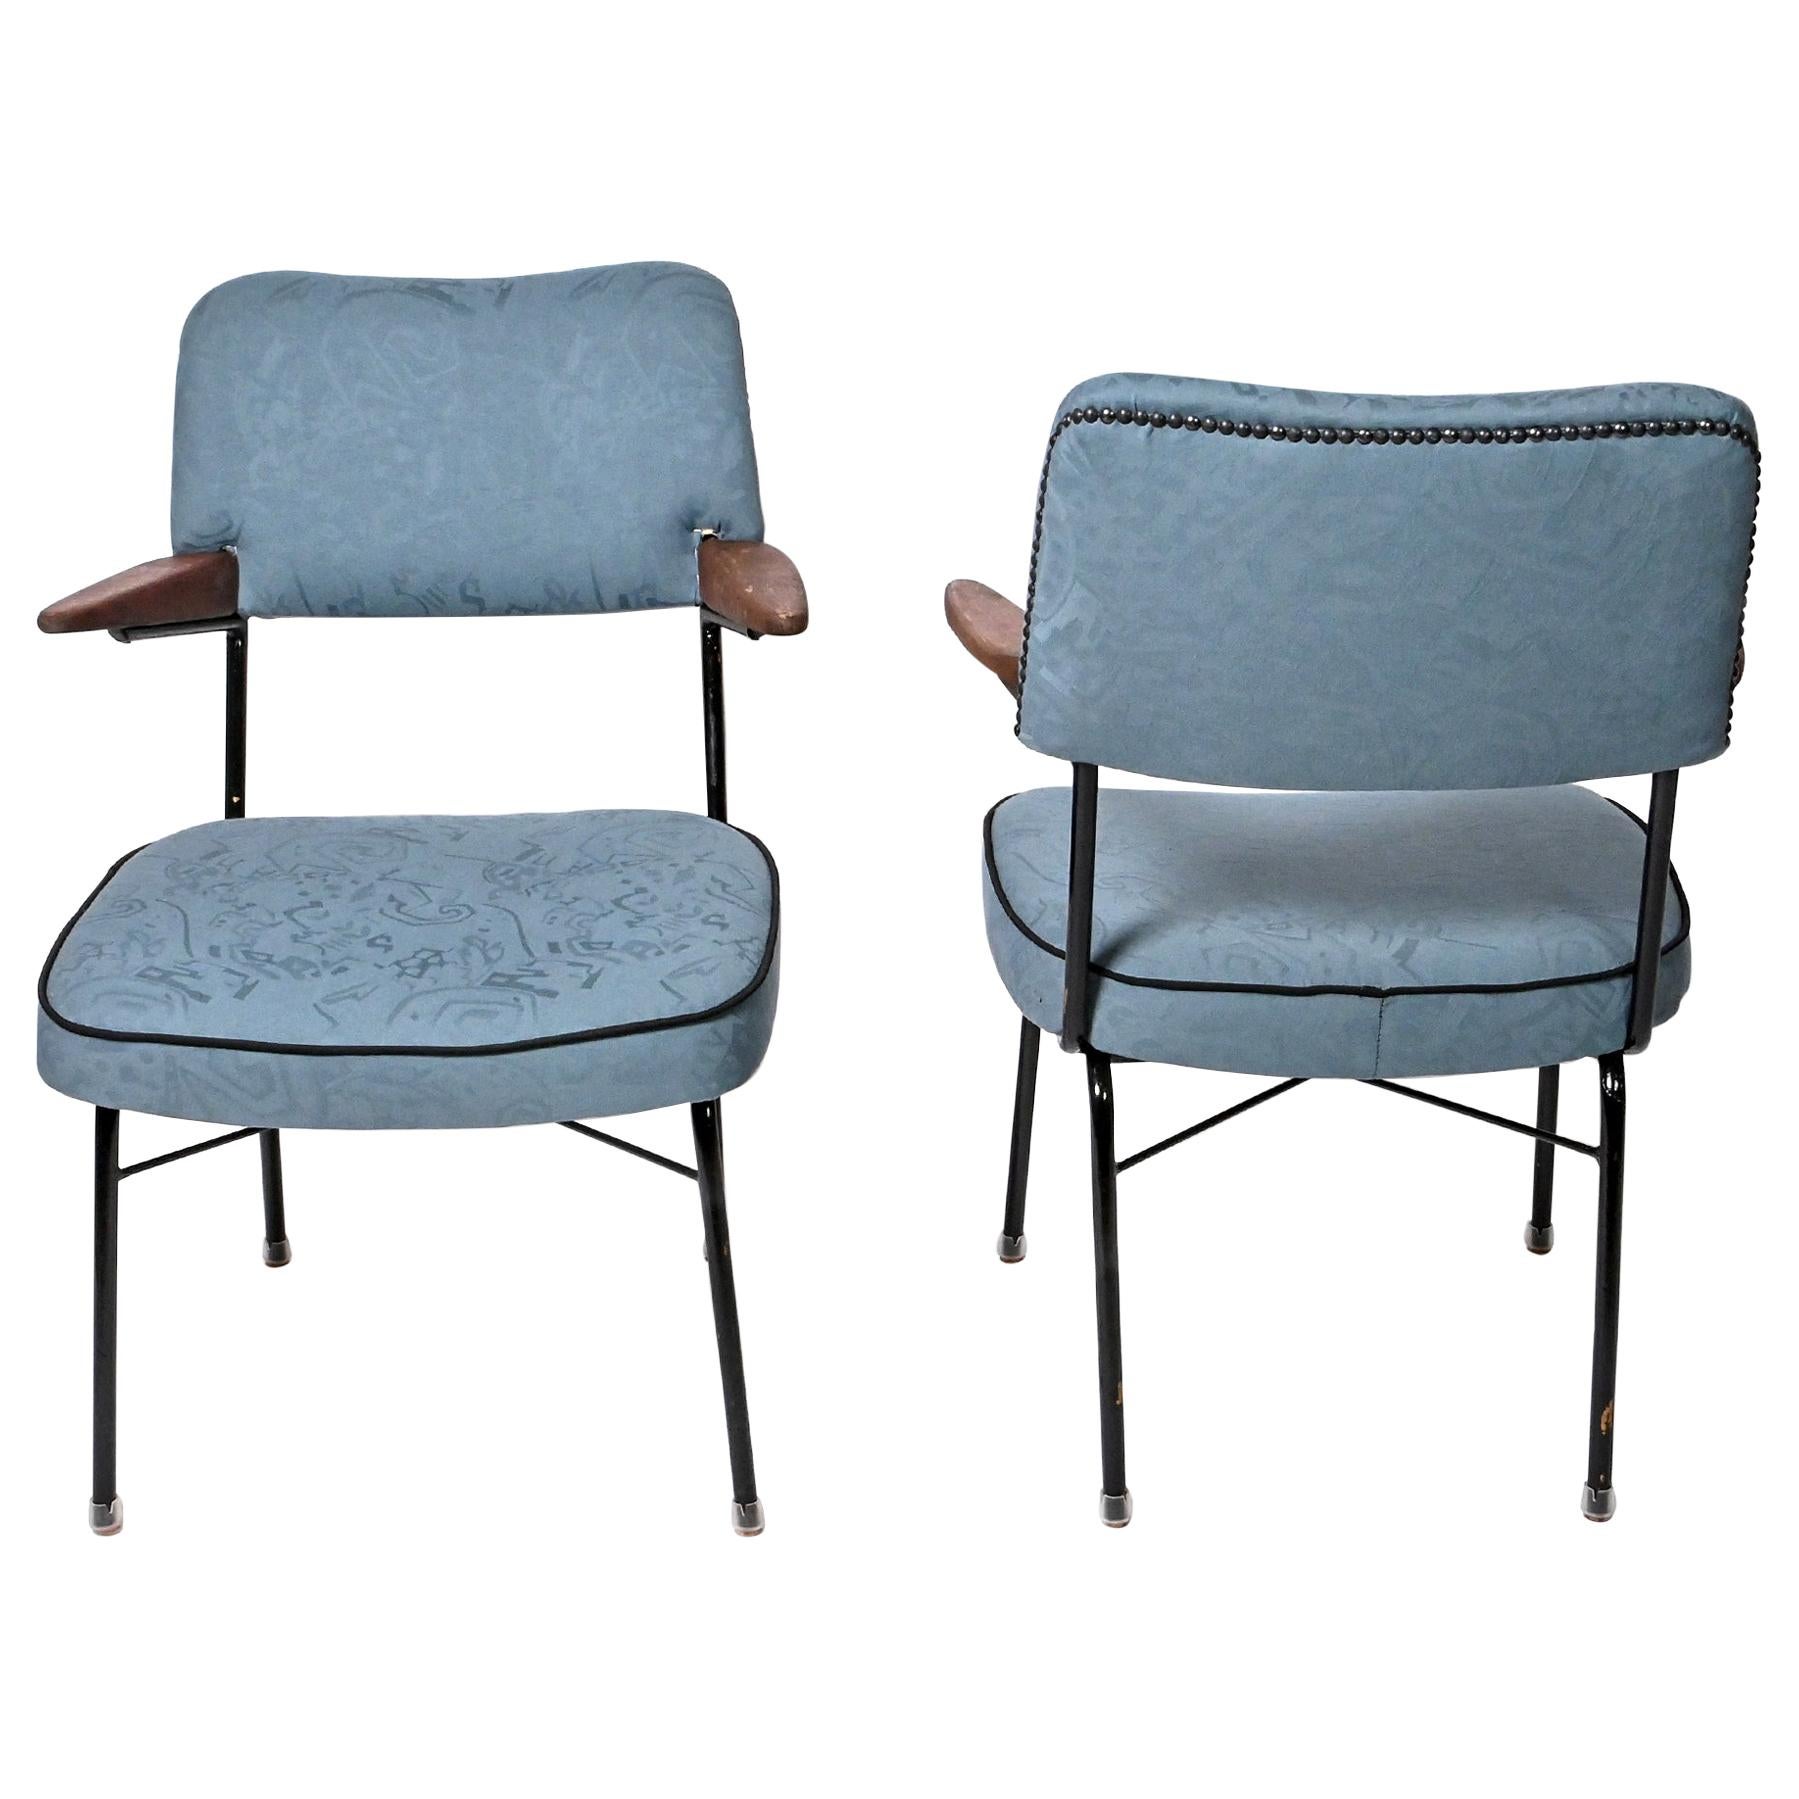 Midcentury Blue Fabric Armchairs, Hungary, 1960s For Sale